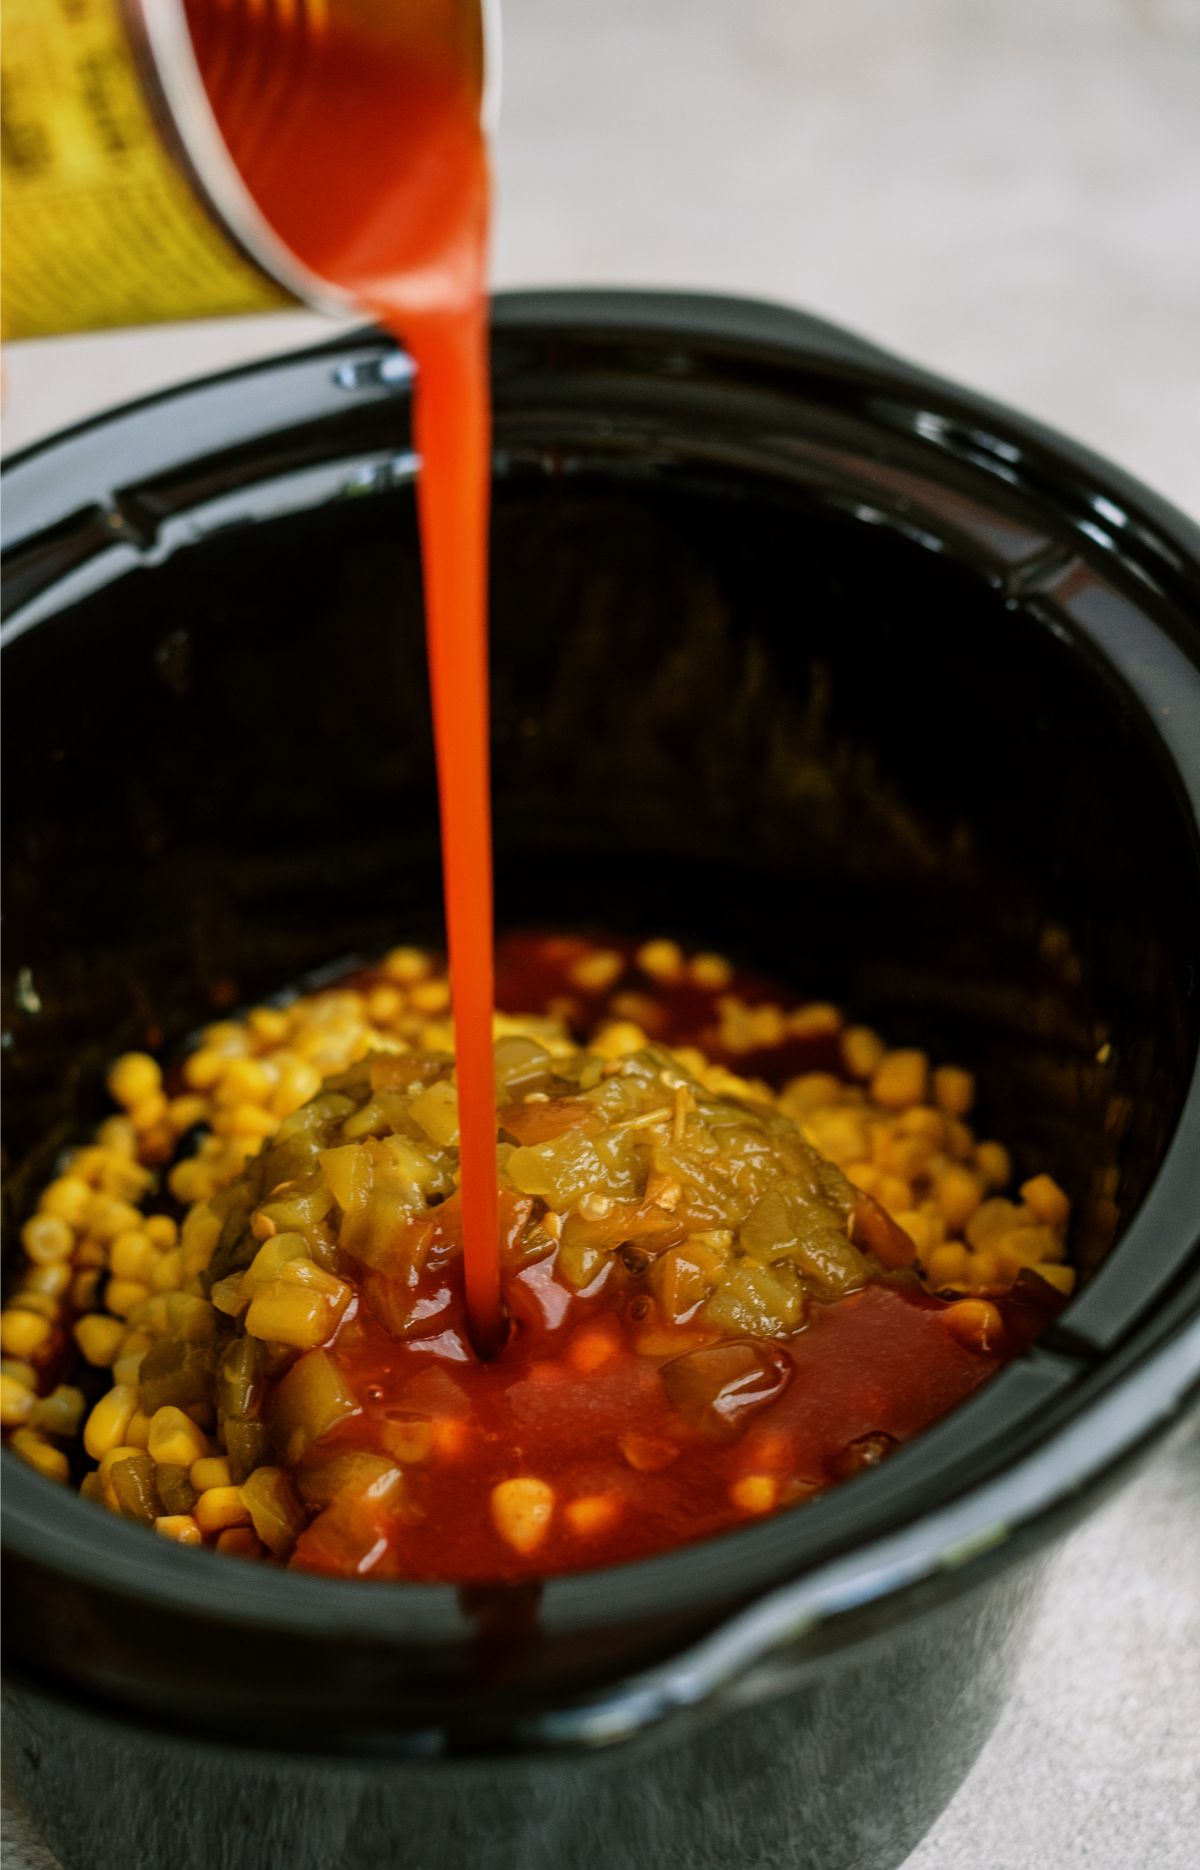 Pouring enchilada sauce on top of ingredients in slow cooker